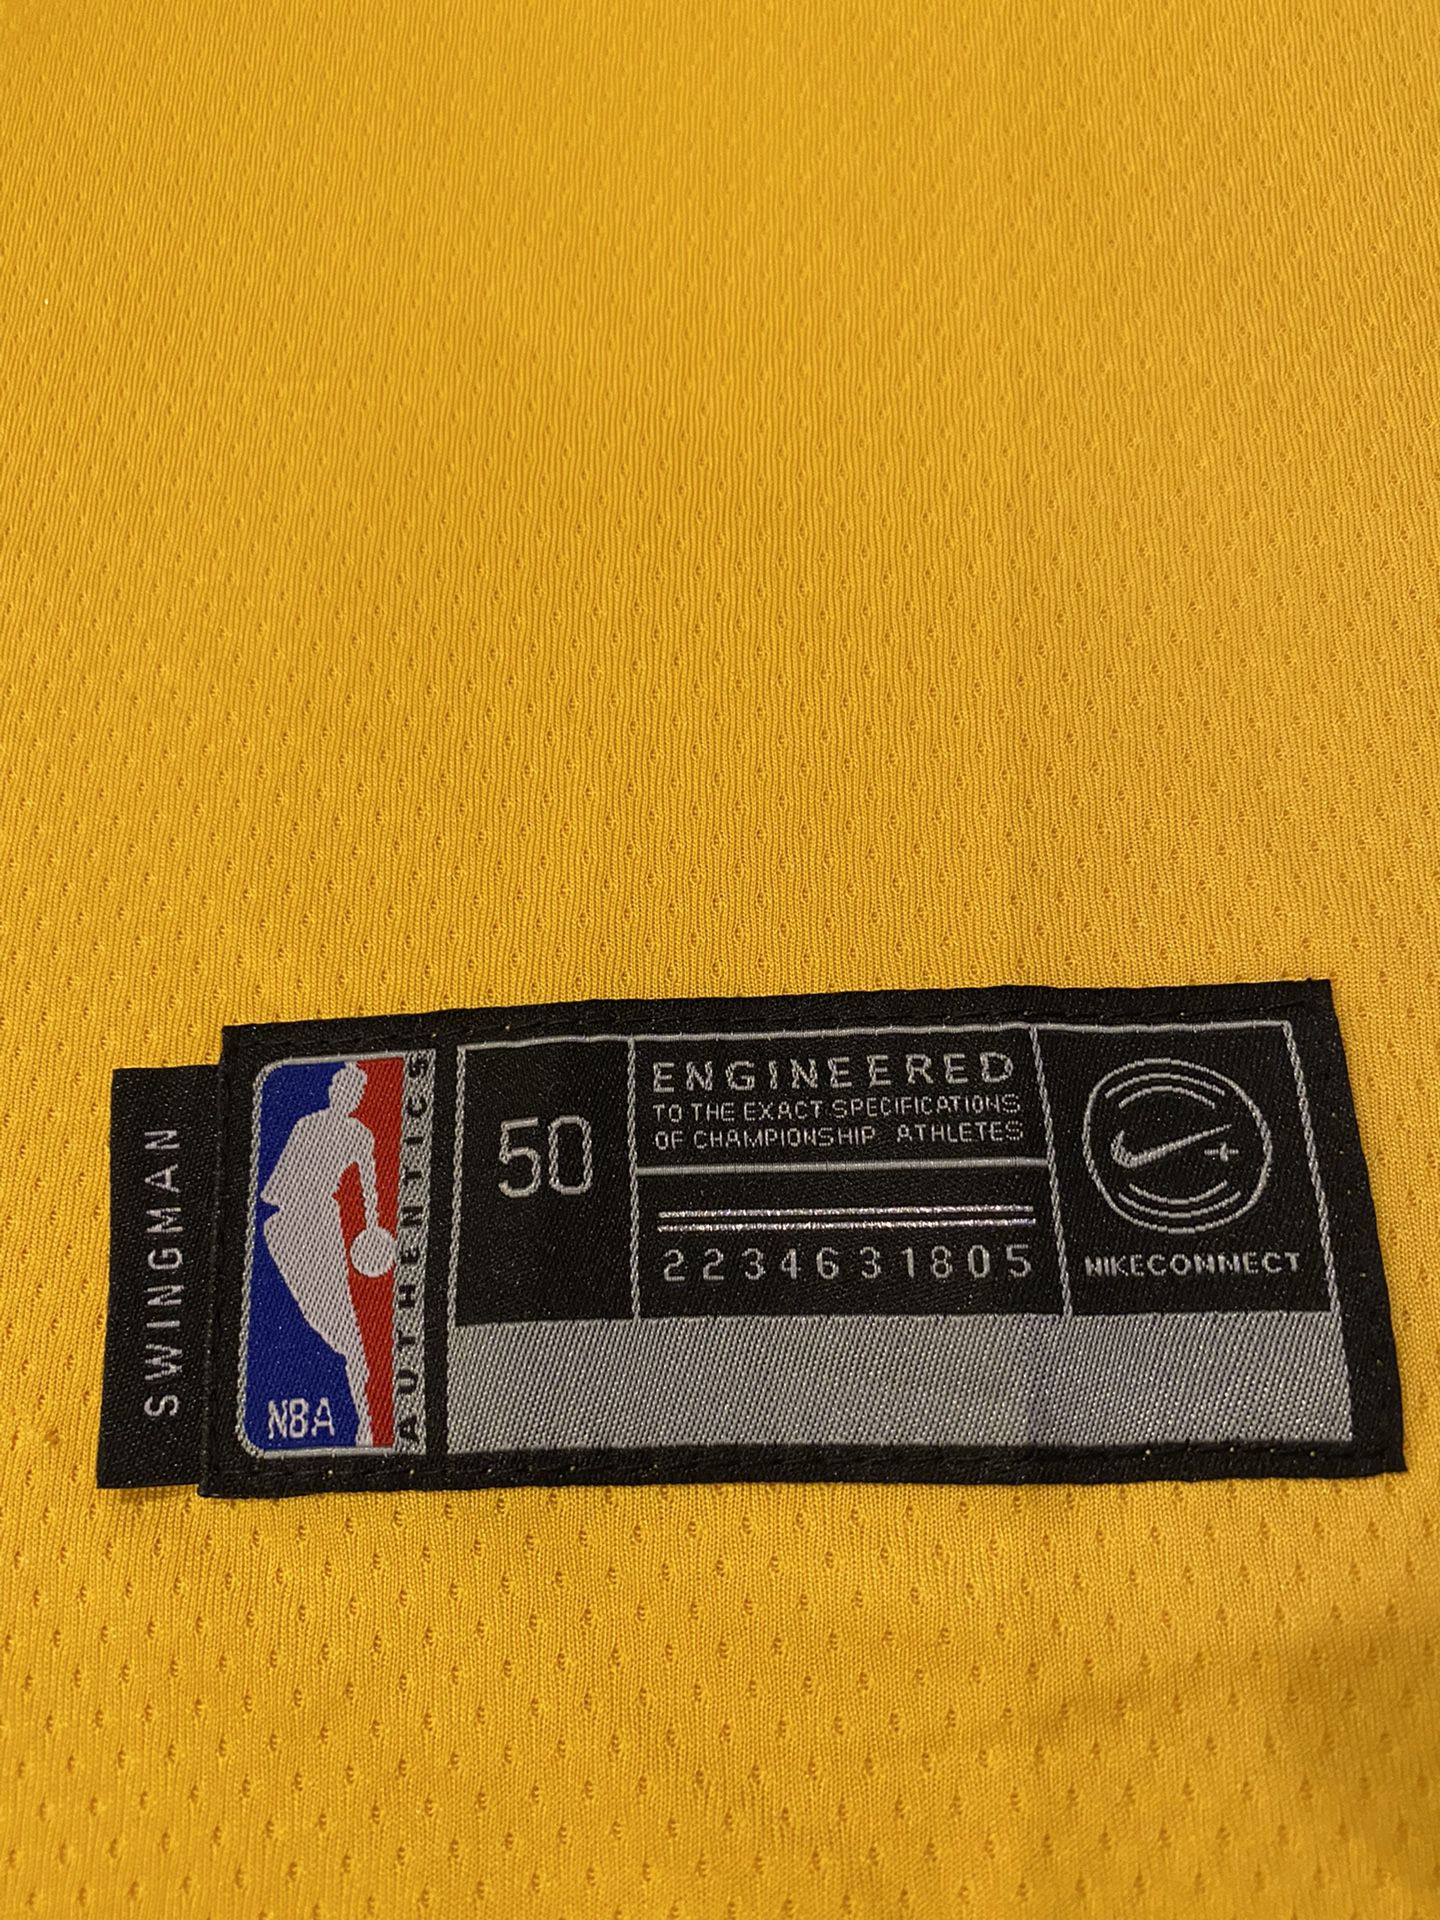 Rare Reebok Kobe Bryant #8 Lakers Jersey Royal Blue Yellow for Sale in  Hazard, CA - OfferUp